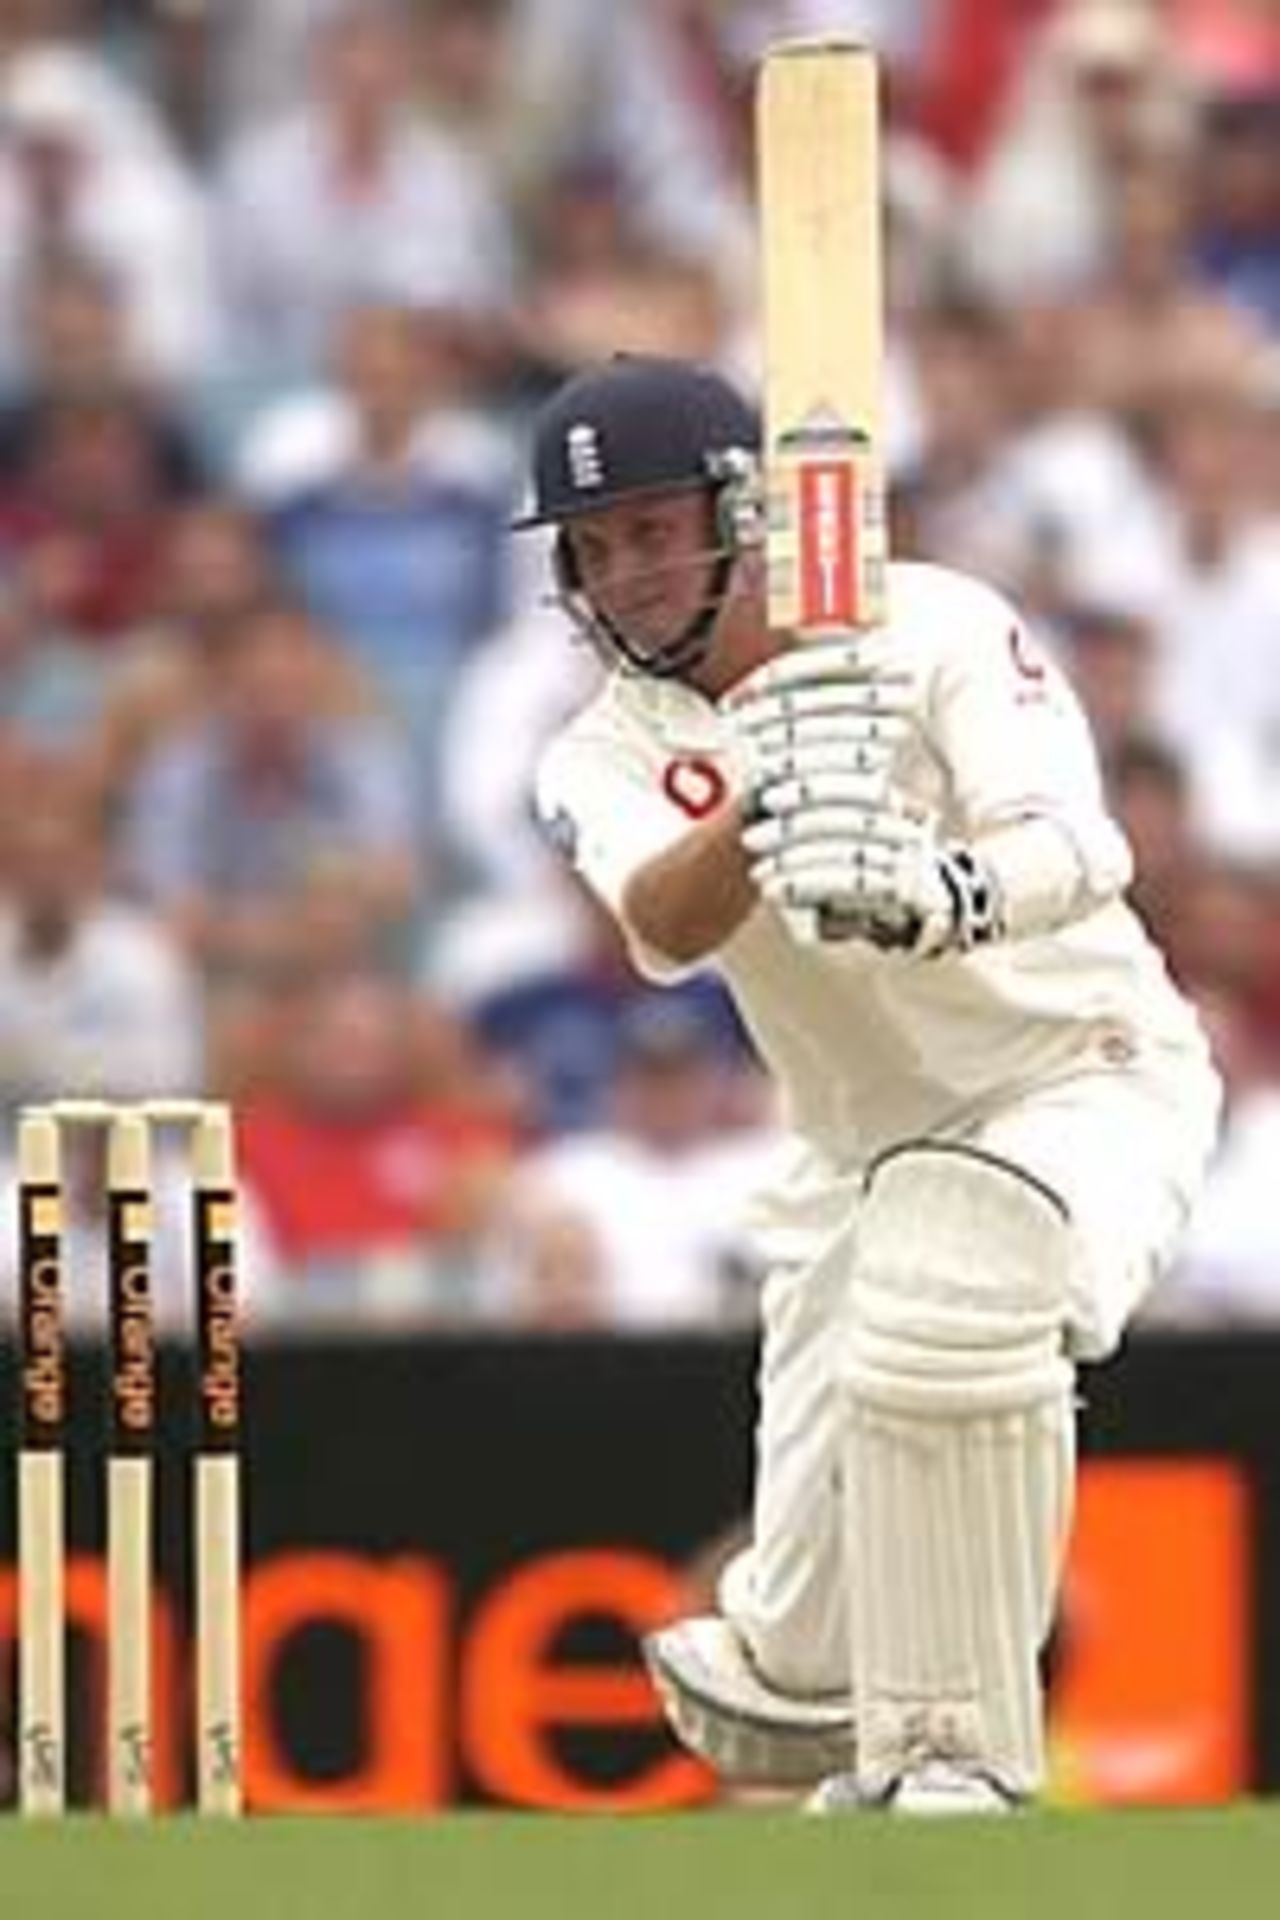 MELBOURNE - DECEMBER 29: Robert Key of England hits out during the fourth day of the fourth Ashes Test between Australia and England at the Melbourne Cricket Ground in Melbourne, Australia on December 29, 2002.